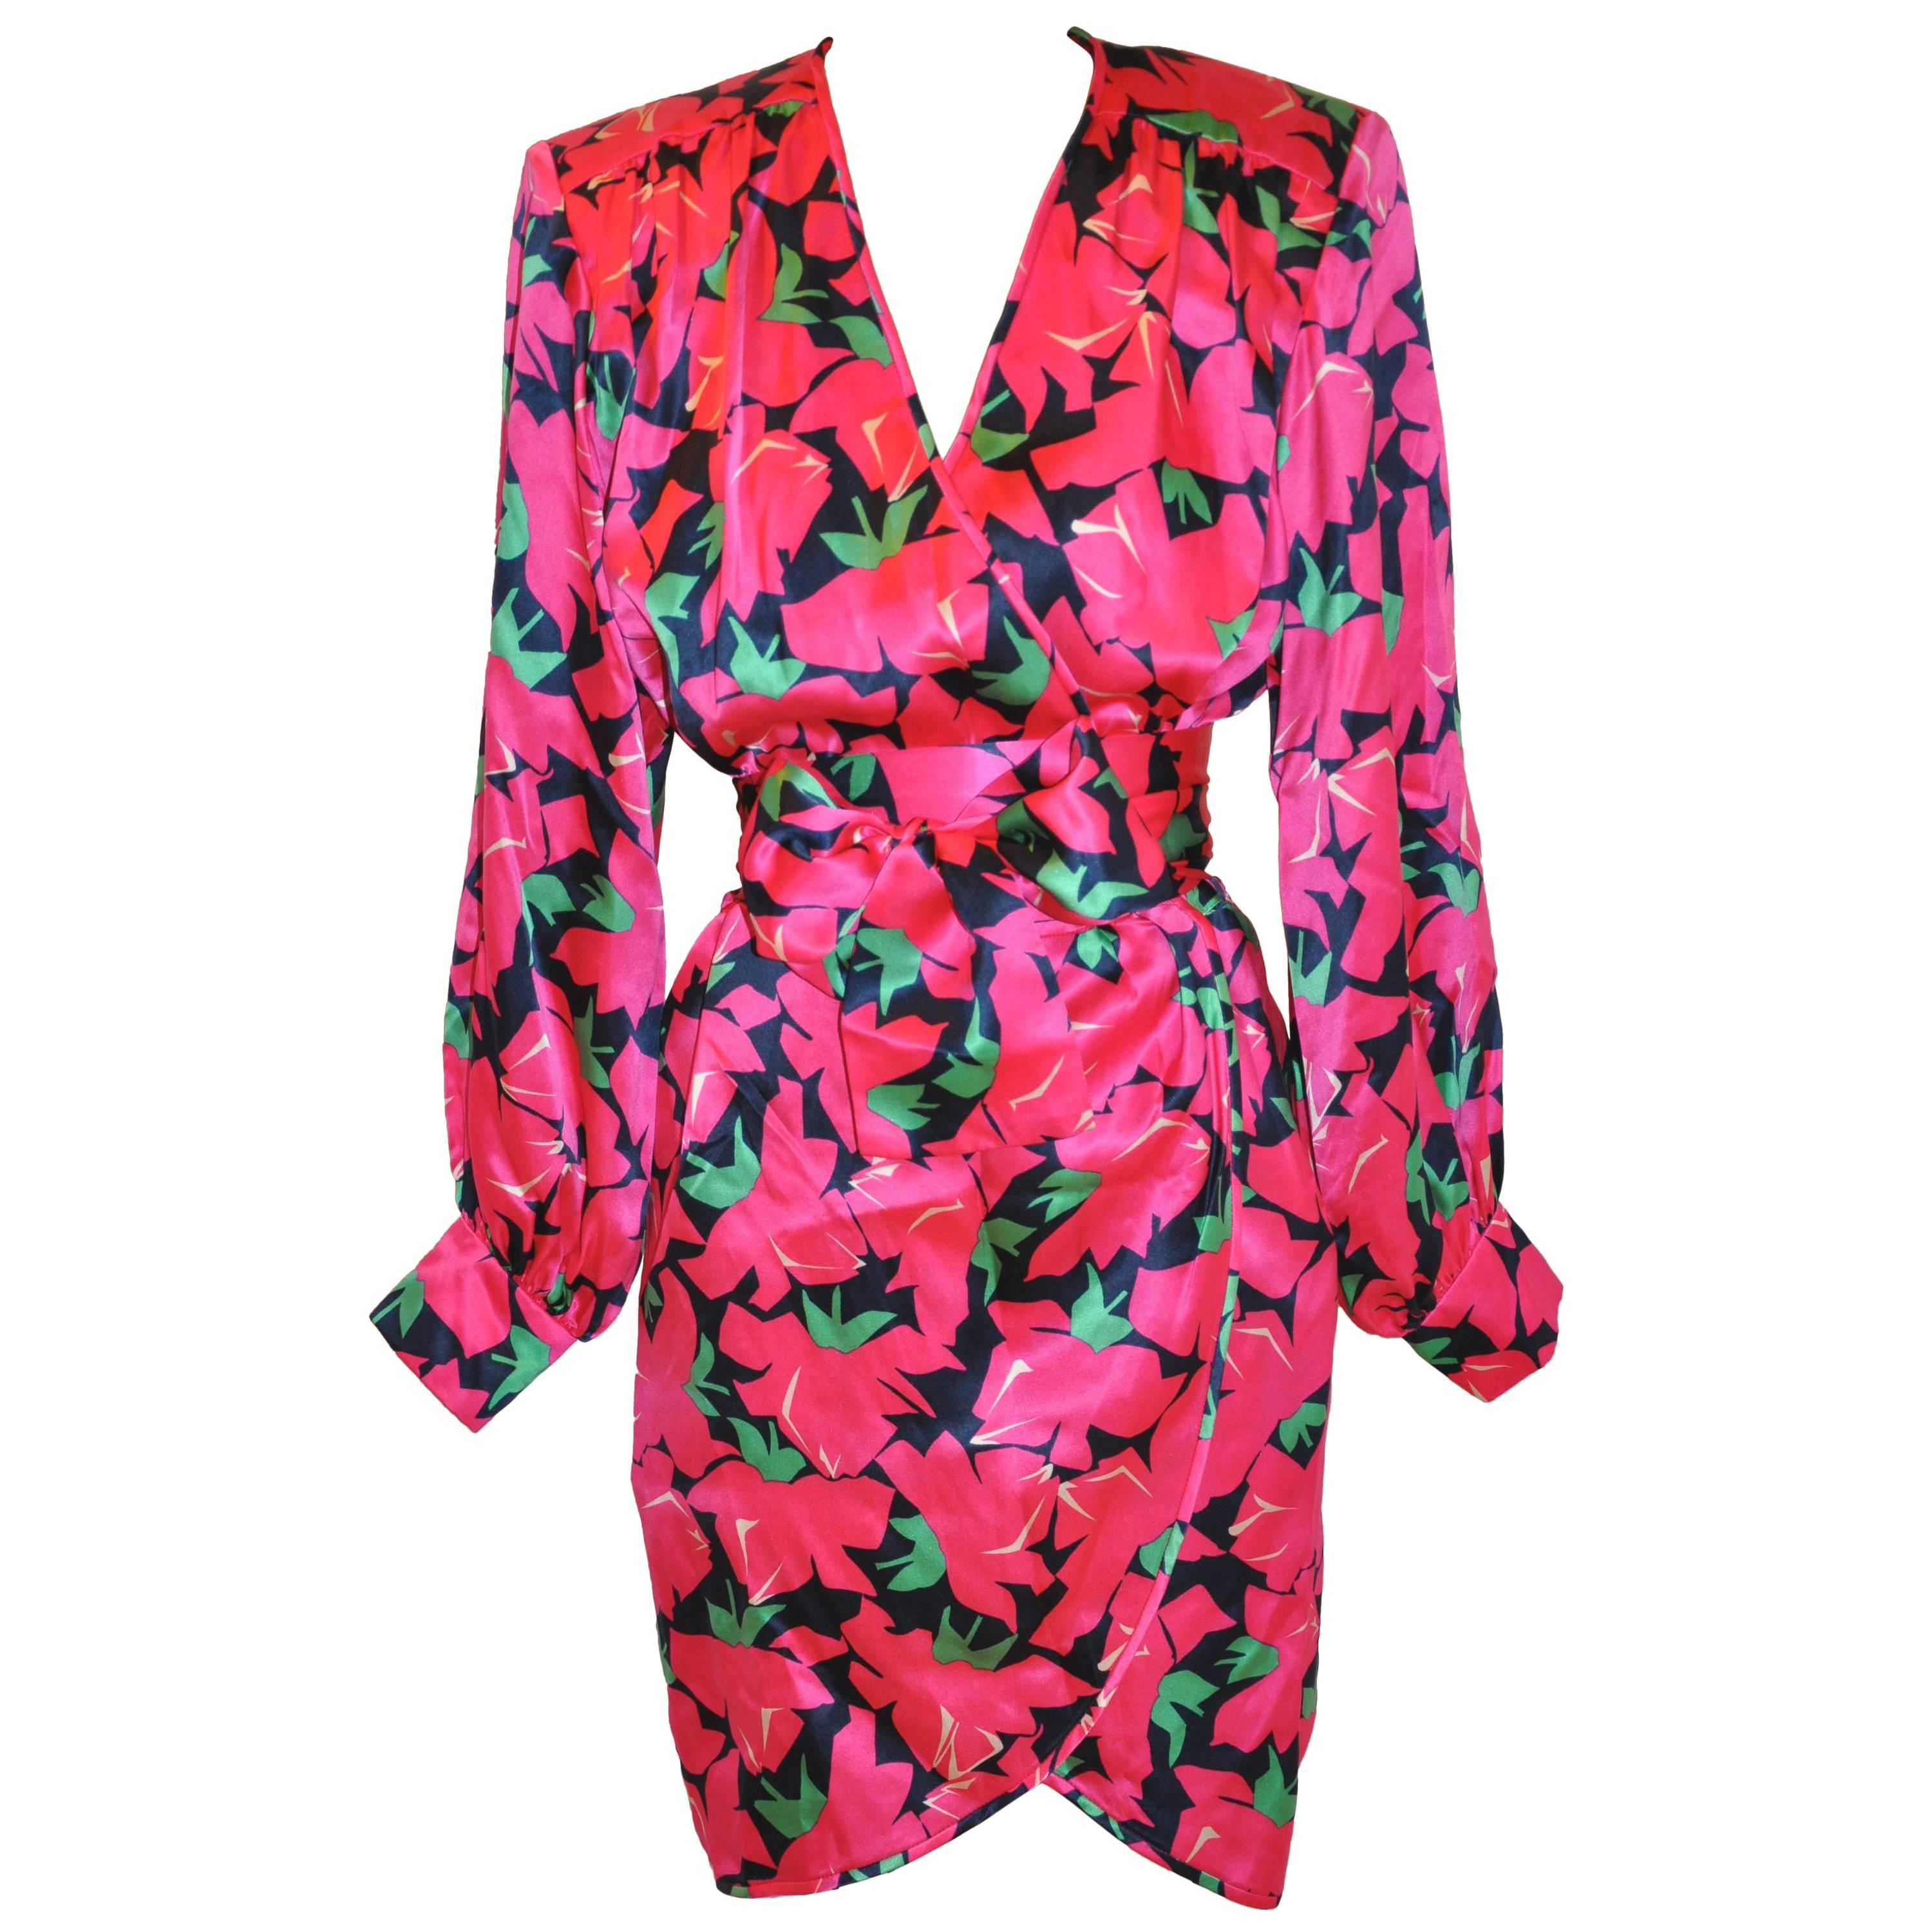 Yves Saint Laurent Bold Fuchsia, Lapis & Green Floral Wrap Dress with Tie